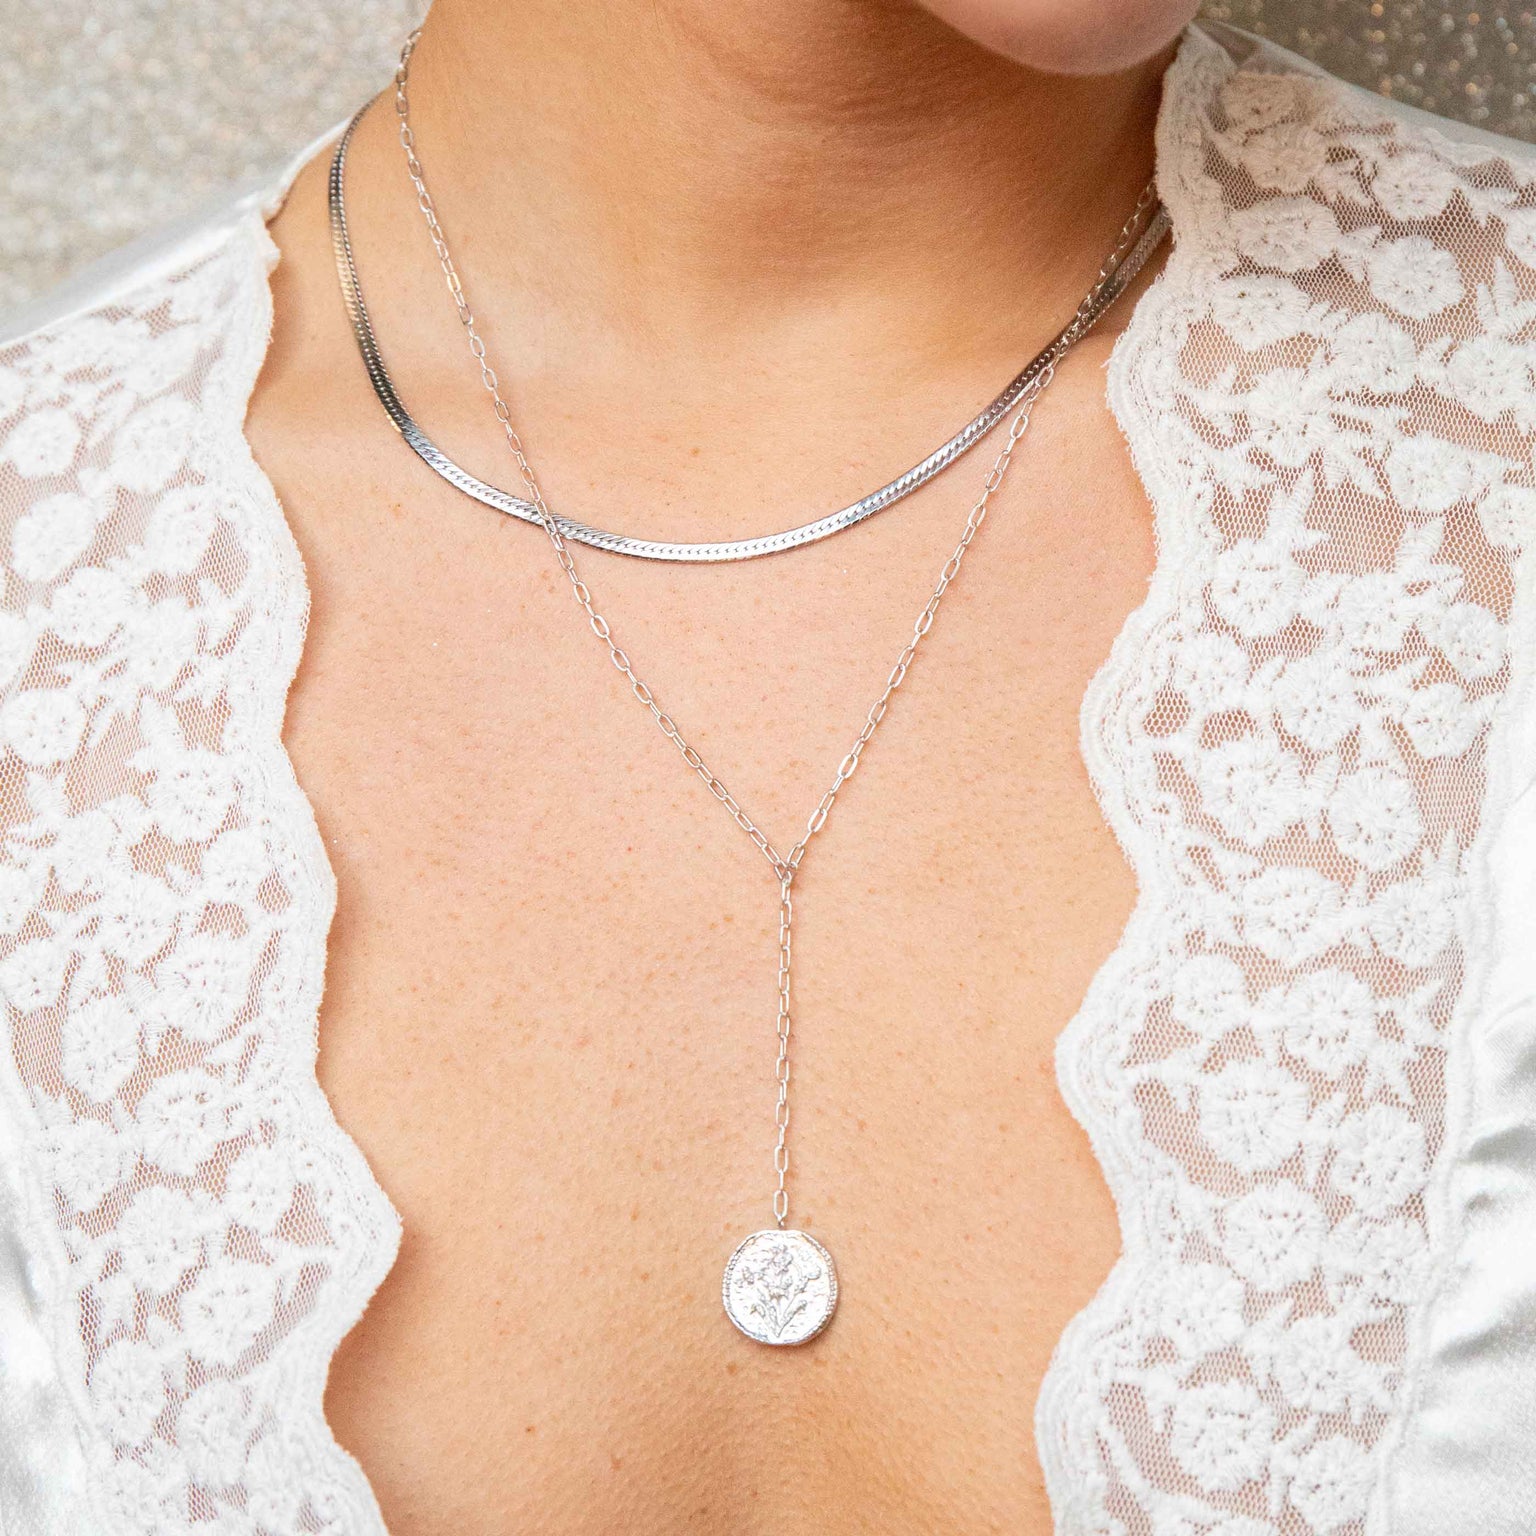 silver snake chain worn with lariat necklace